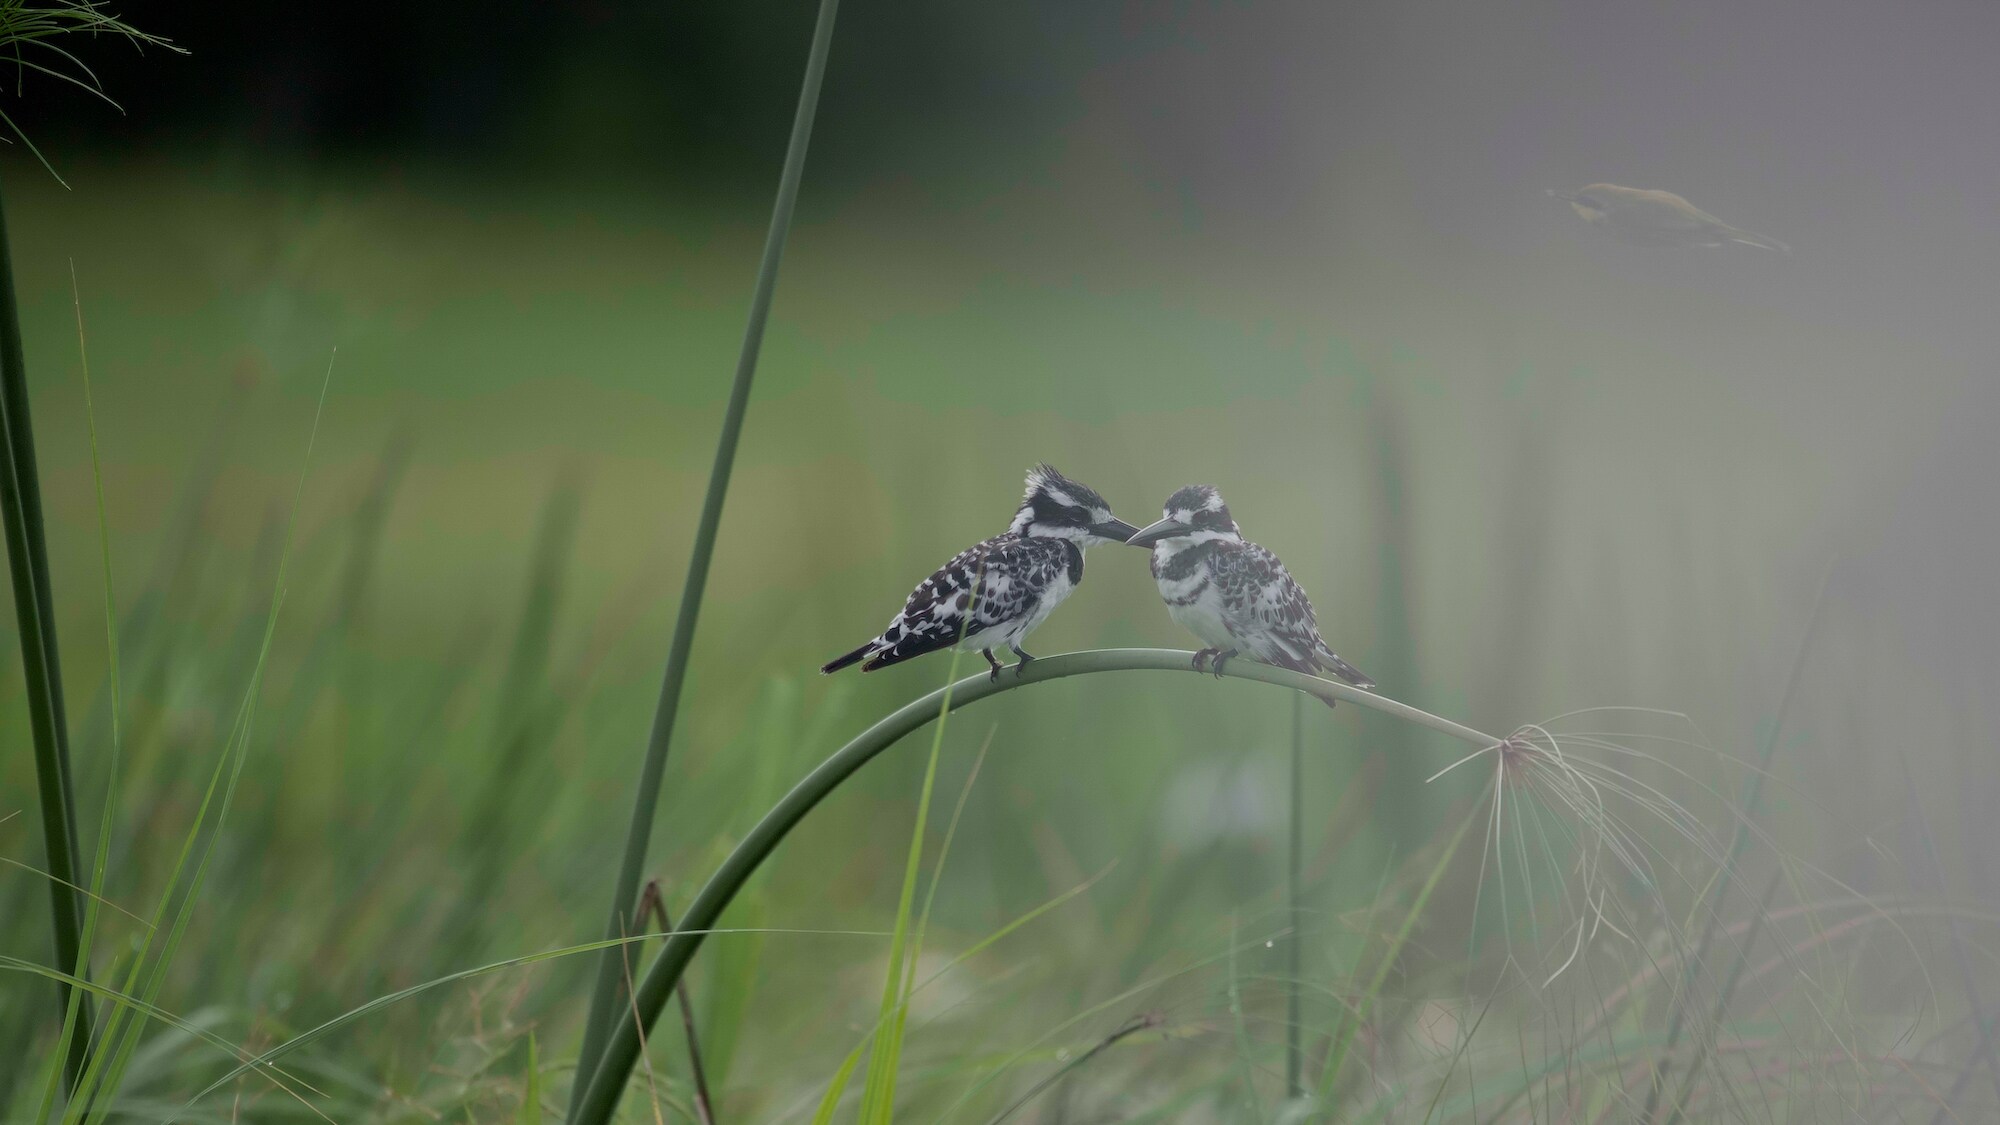 Two pied kingfisher on a reed. (National Geographic for Disney+/Carl Ruysenarr)